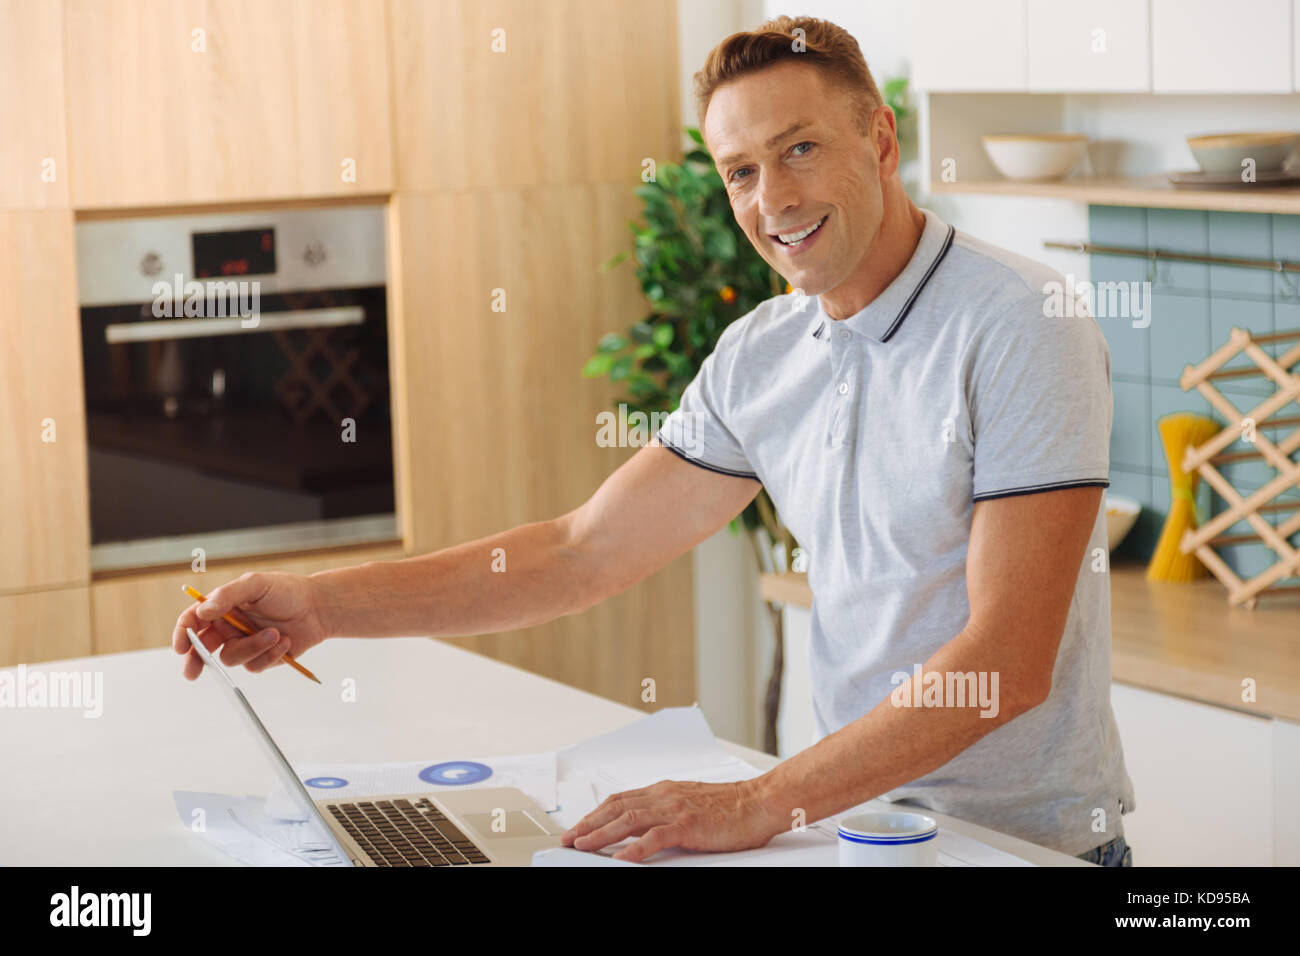 Cheerful positive man opening his laptop Stock Photo